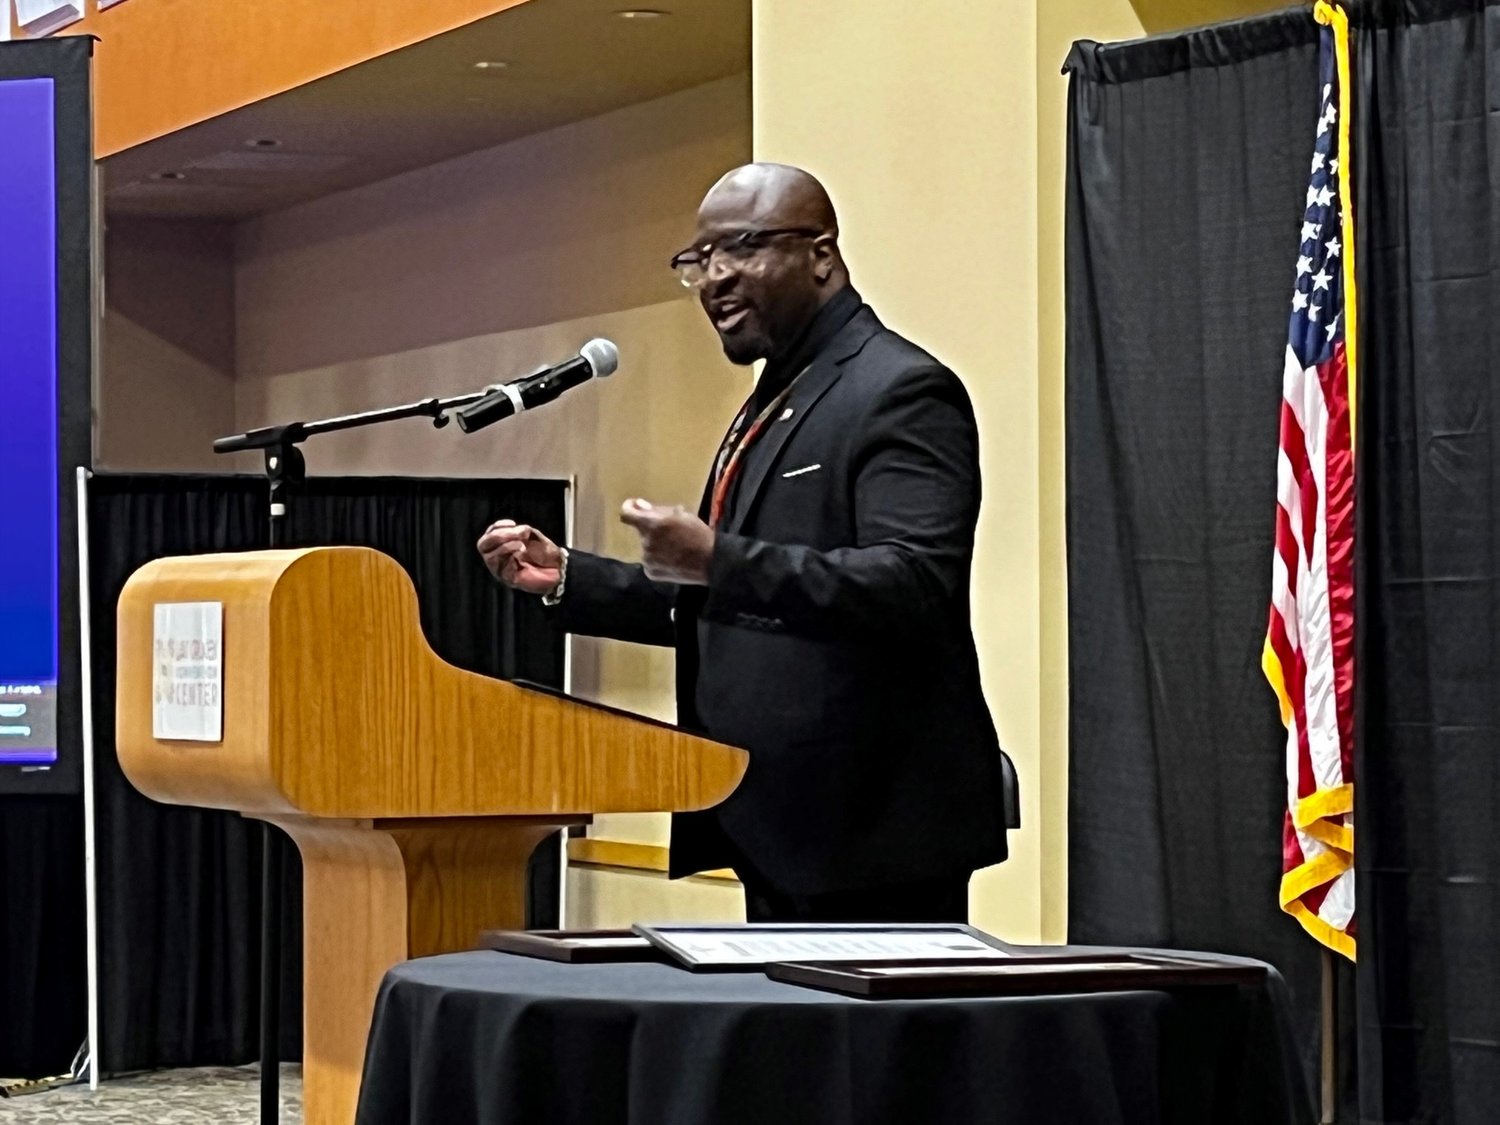 NMSU Associate Provost Patrick Turner delivering the keynote address at the Doña Ana County NAACP’s Juneteenth Banquet, held June 18 at the Las Cruces Convention Center.